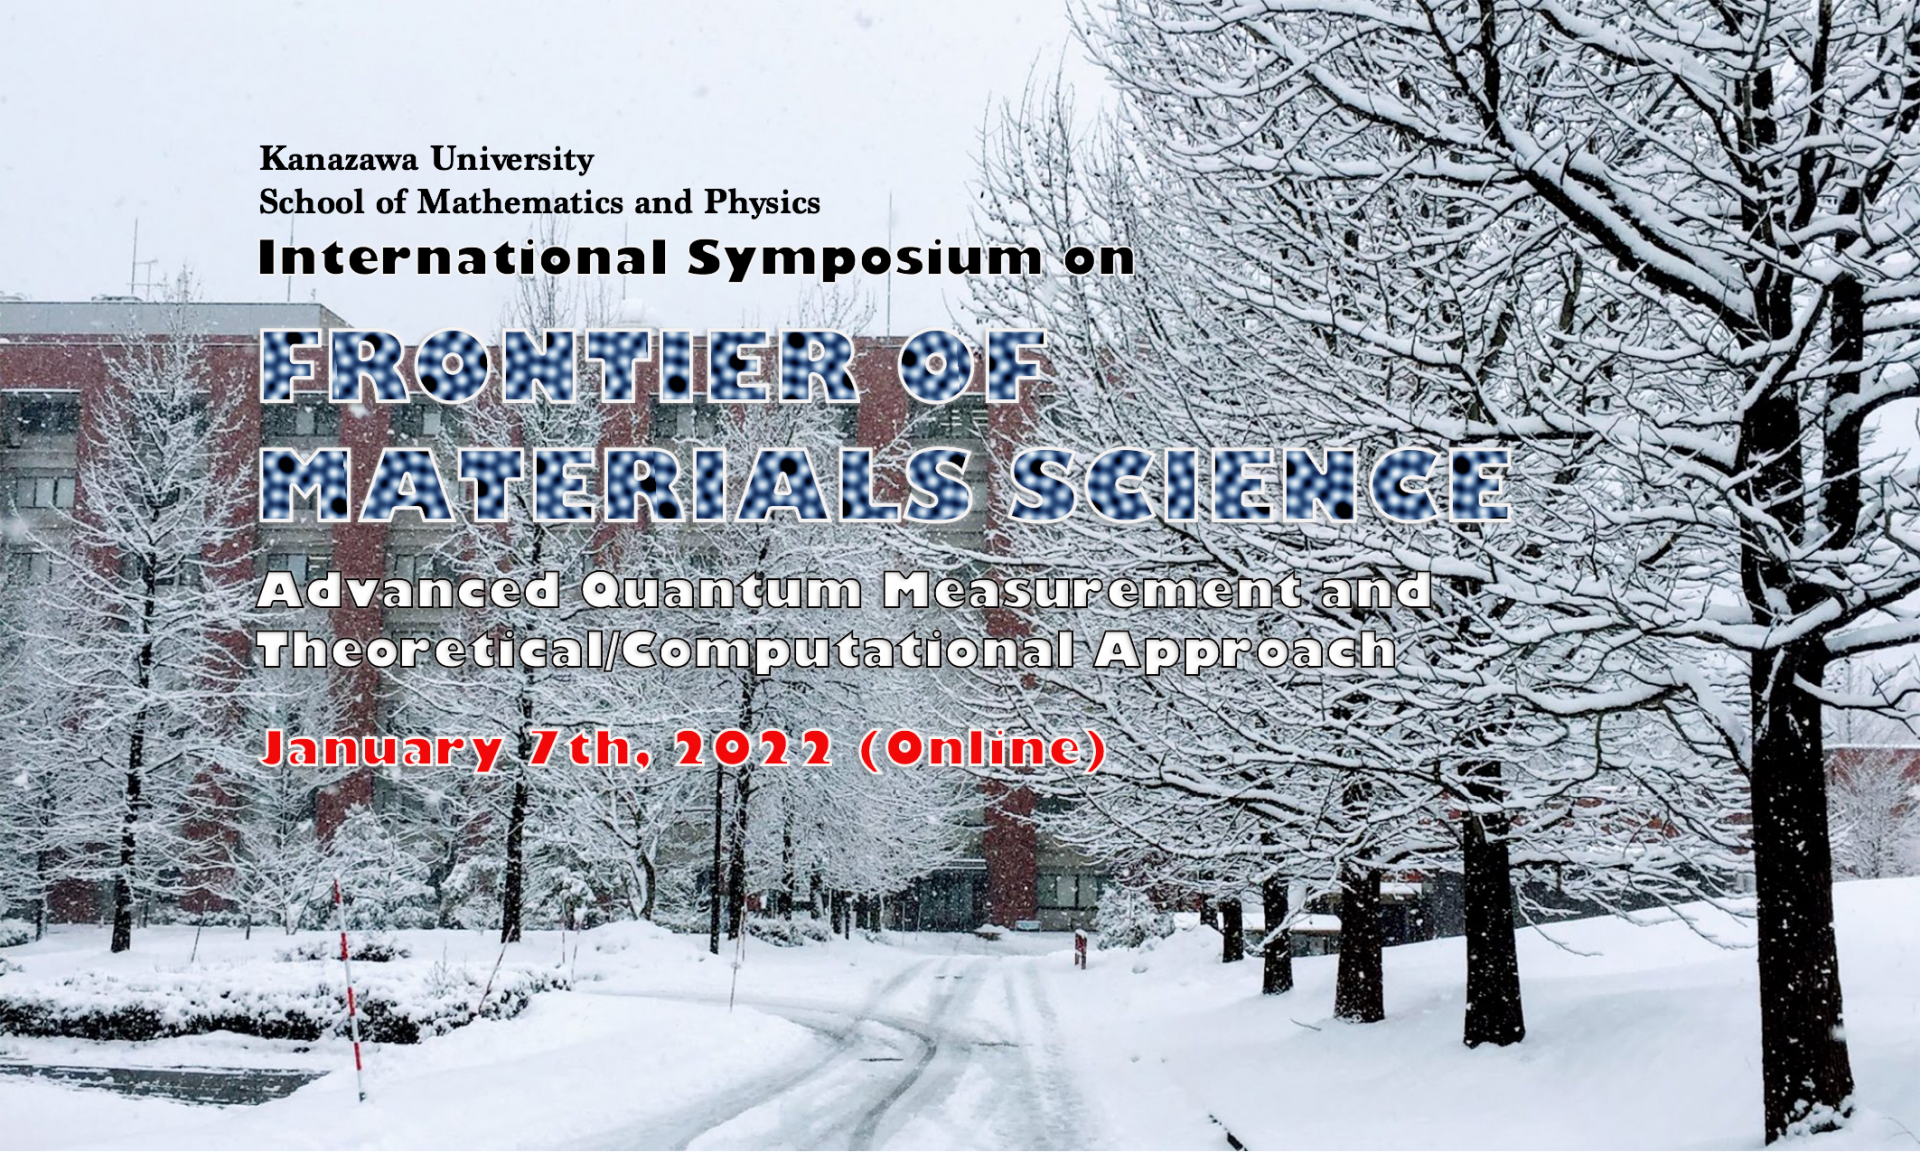 International Symposium on Frontier of Materials Science